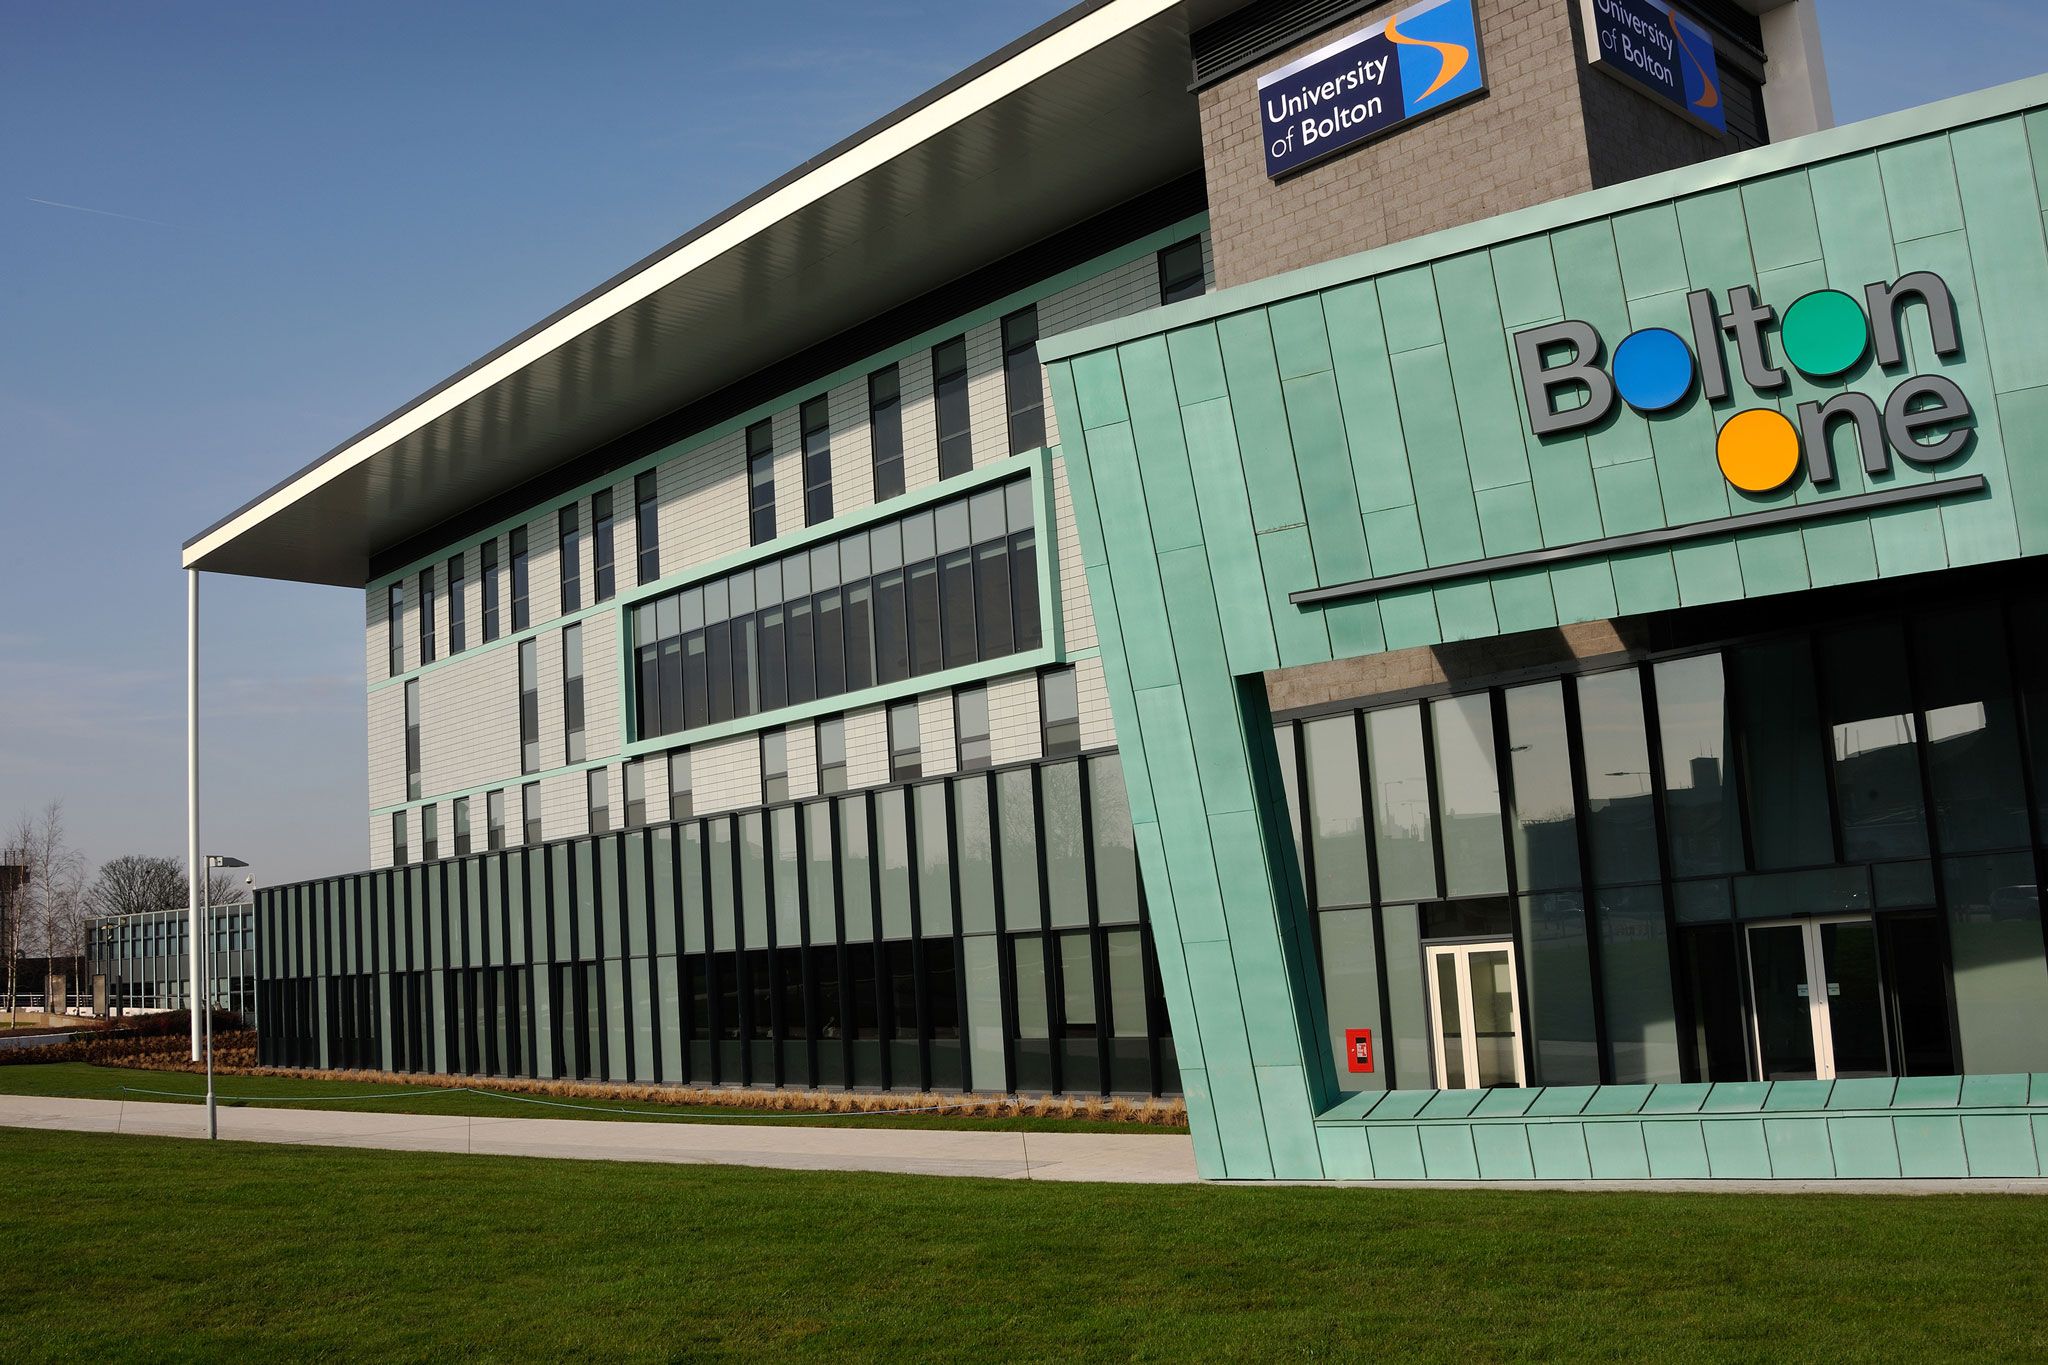 An-external-view-of-the-Bolton-One-Sports-Facilities-at-the-University-of-Bolton.jpg